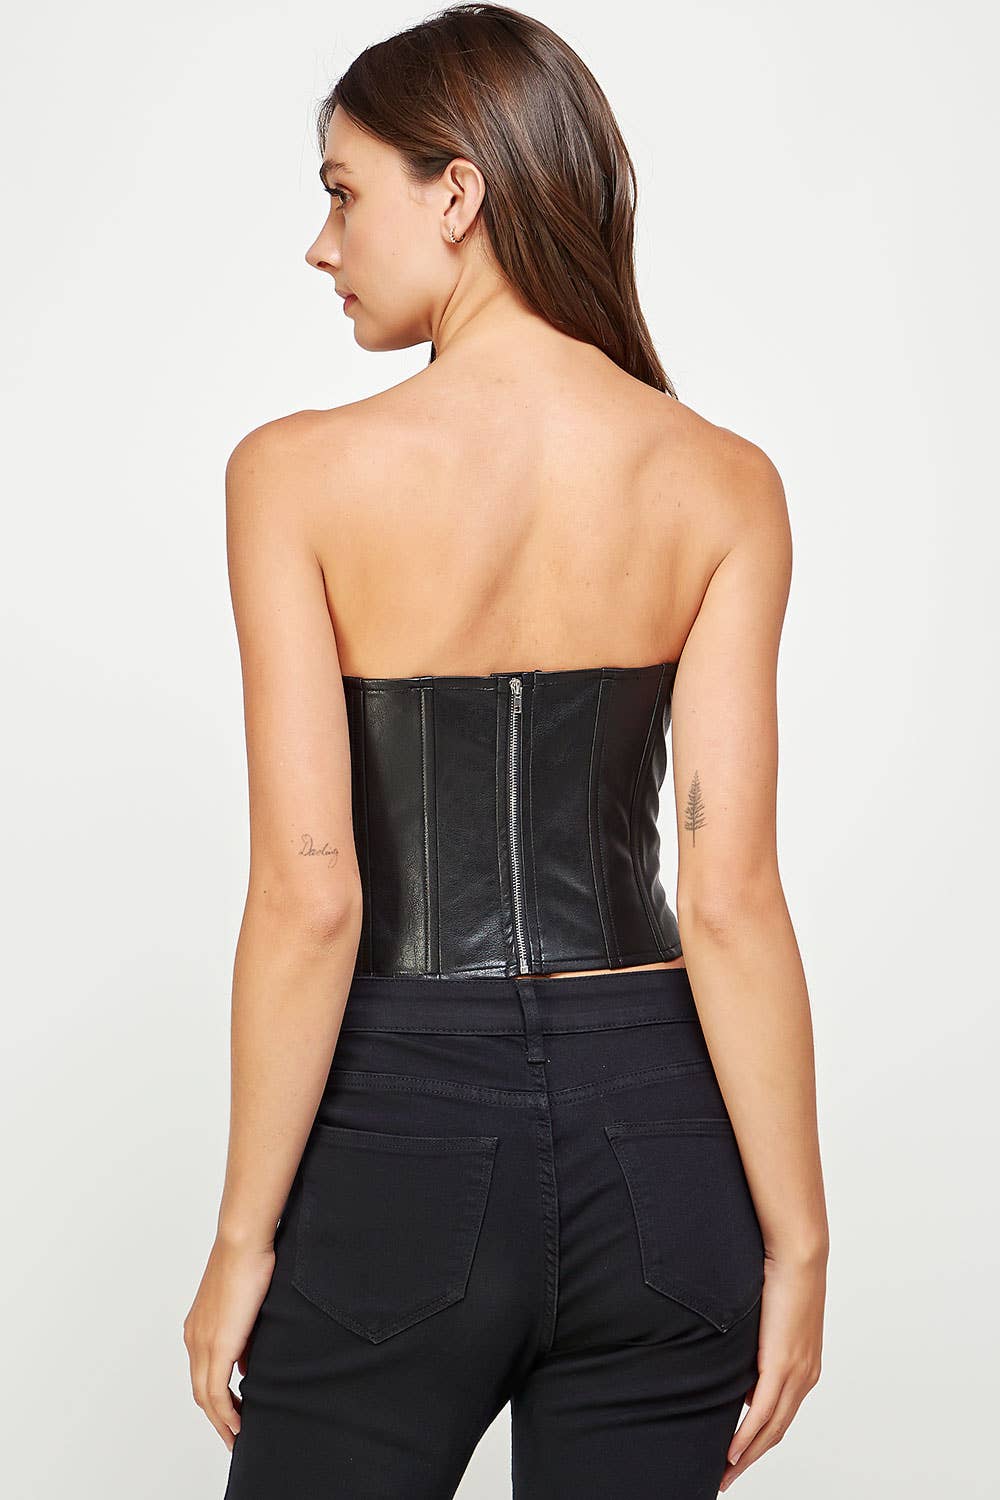 black-corset-pleather-the-shameless-collection